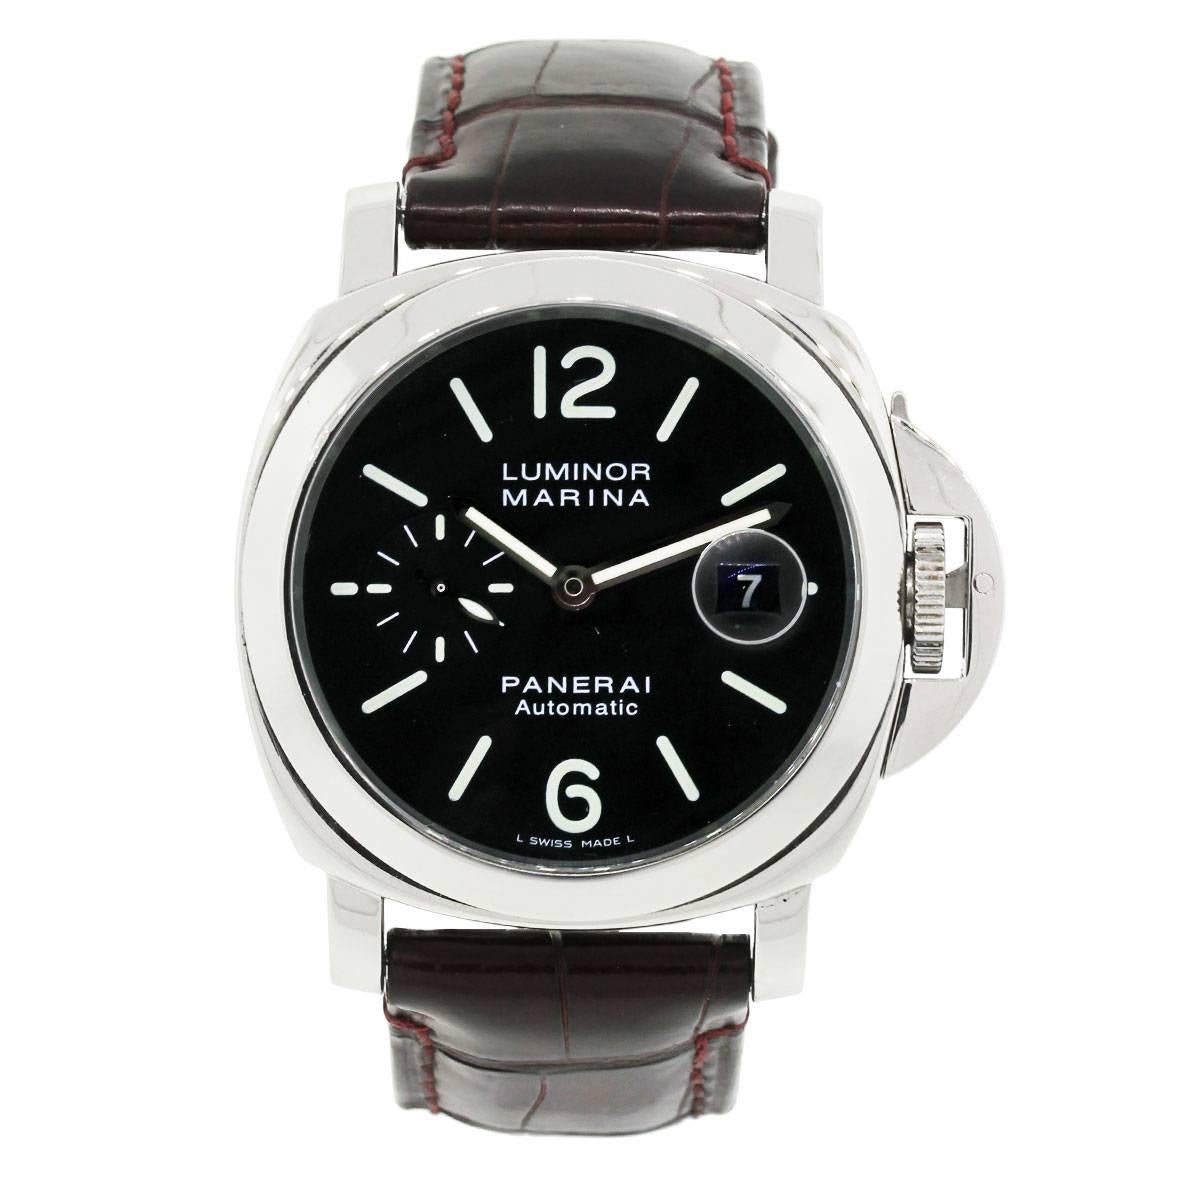 Brand: Panerai
MPN: PAM104
Model: Luminor Marina
Case Material: Stainless steel
Case Diameter: 44mm
Crystal: Scratch resistant sapphire
Bezel: Stainless steel smooth bezel
Dial: Black diamond dial with date window at the 3 o’clock position